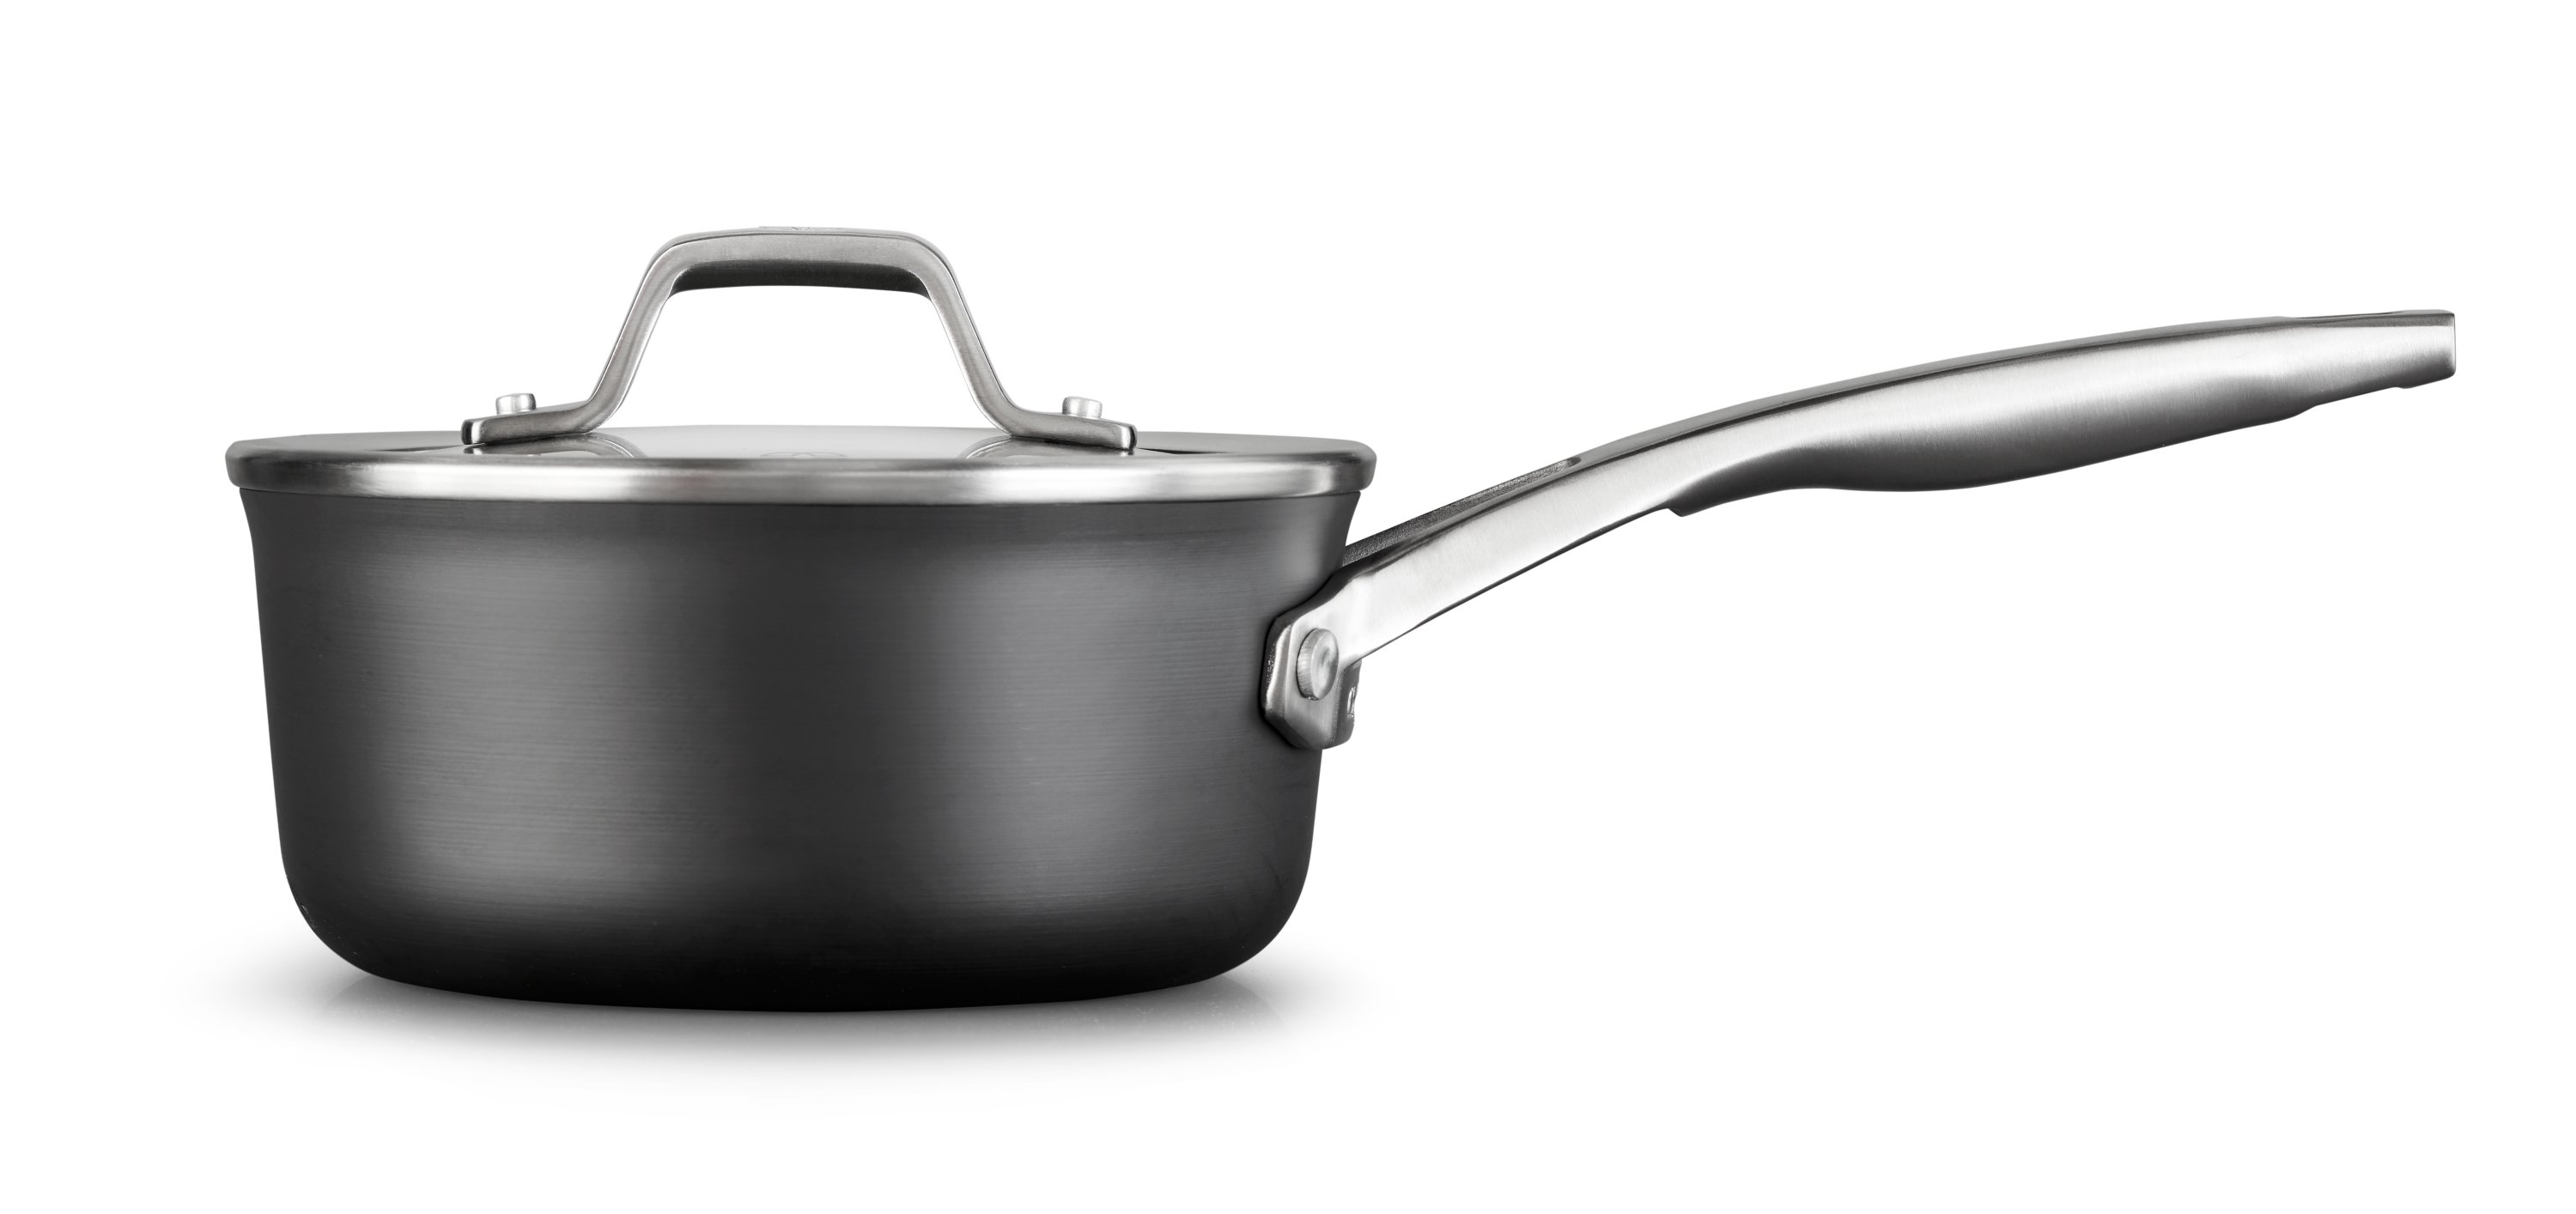 https://newellbrands.scene7.com/is/image//NewellRubbermaid/2029645-calphalon-premier-1.5qt-ns-sauce-pan-with-cover-without-food-beauty-side-view-straight-on-1